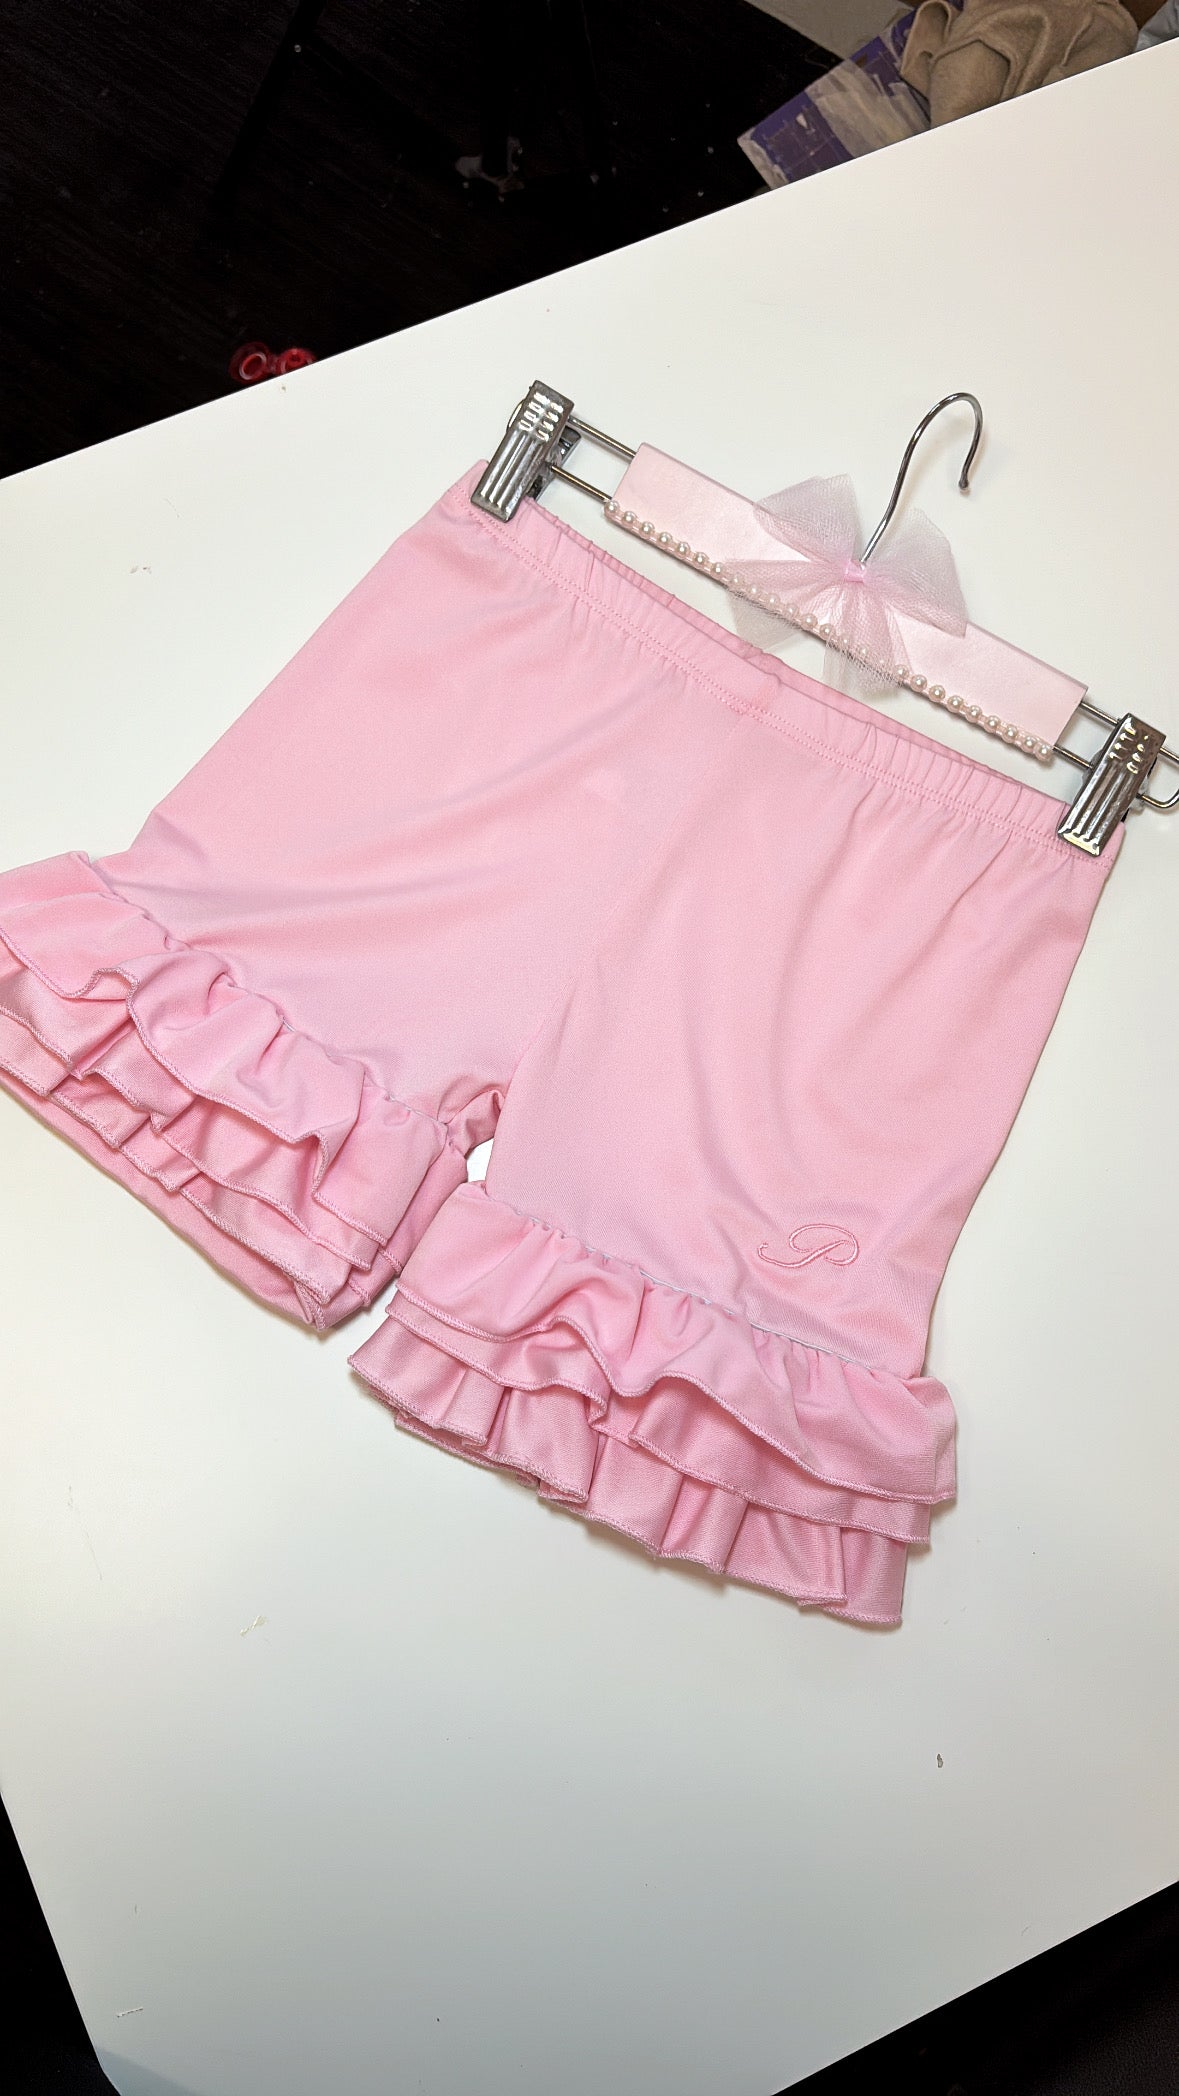 PERSONALISED FRILLY CYCLING SHORTS 2-4 WEEKS